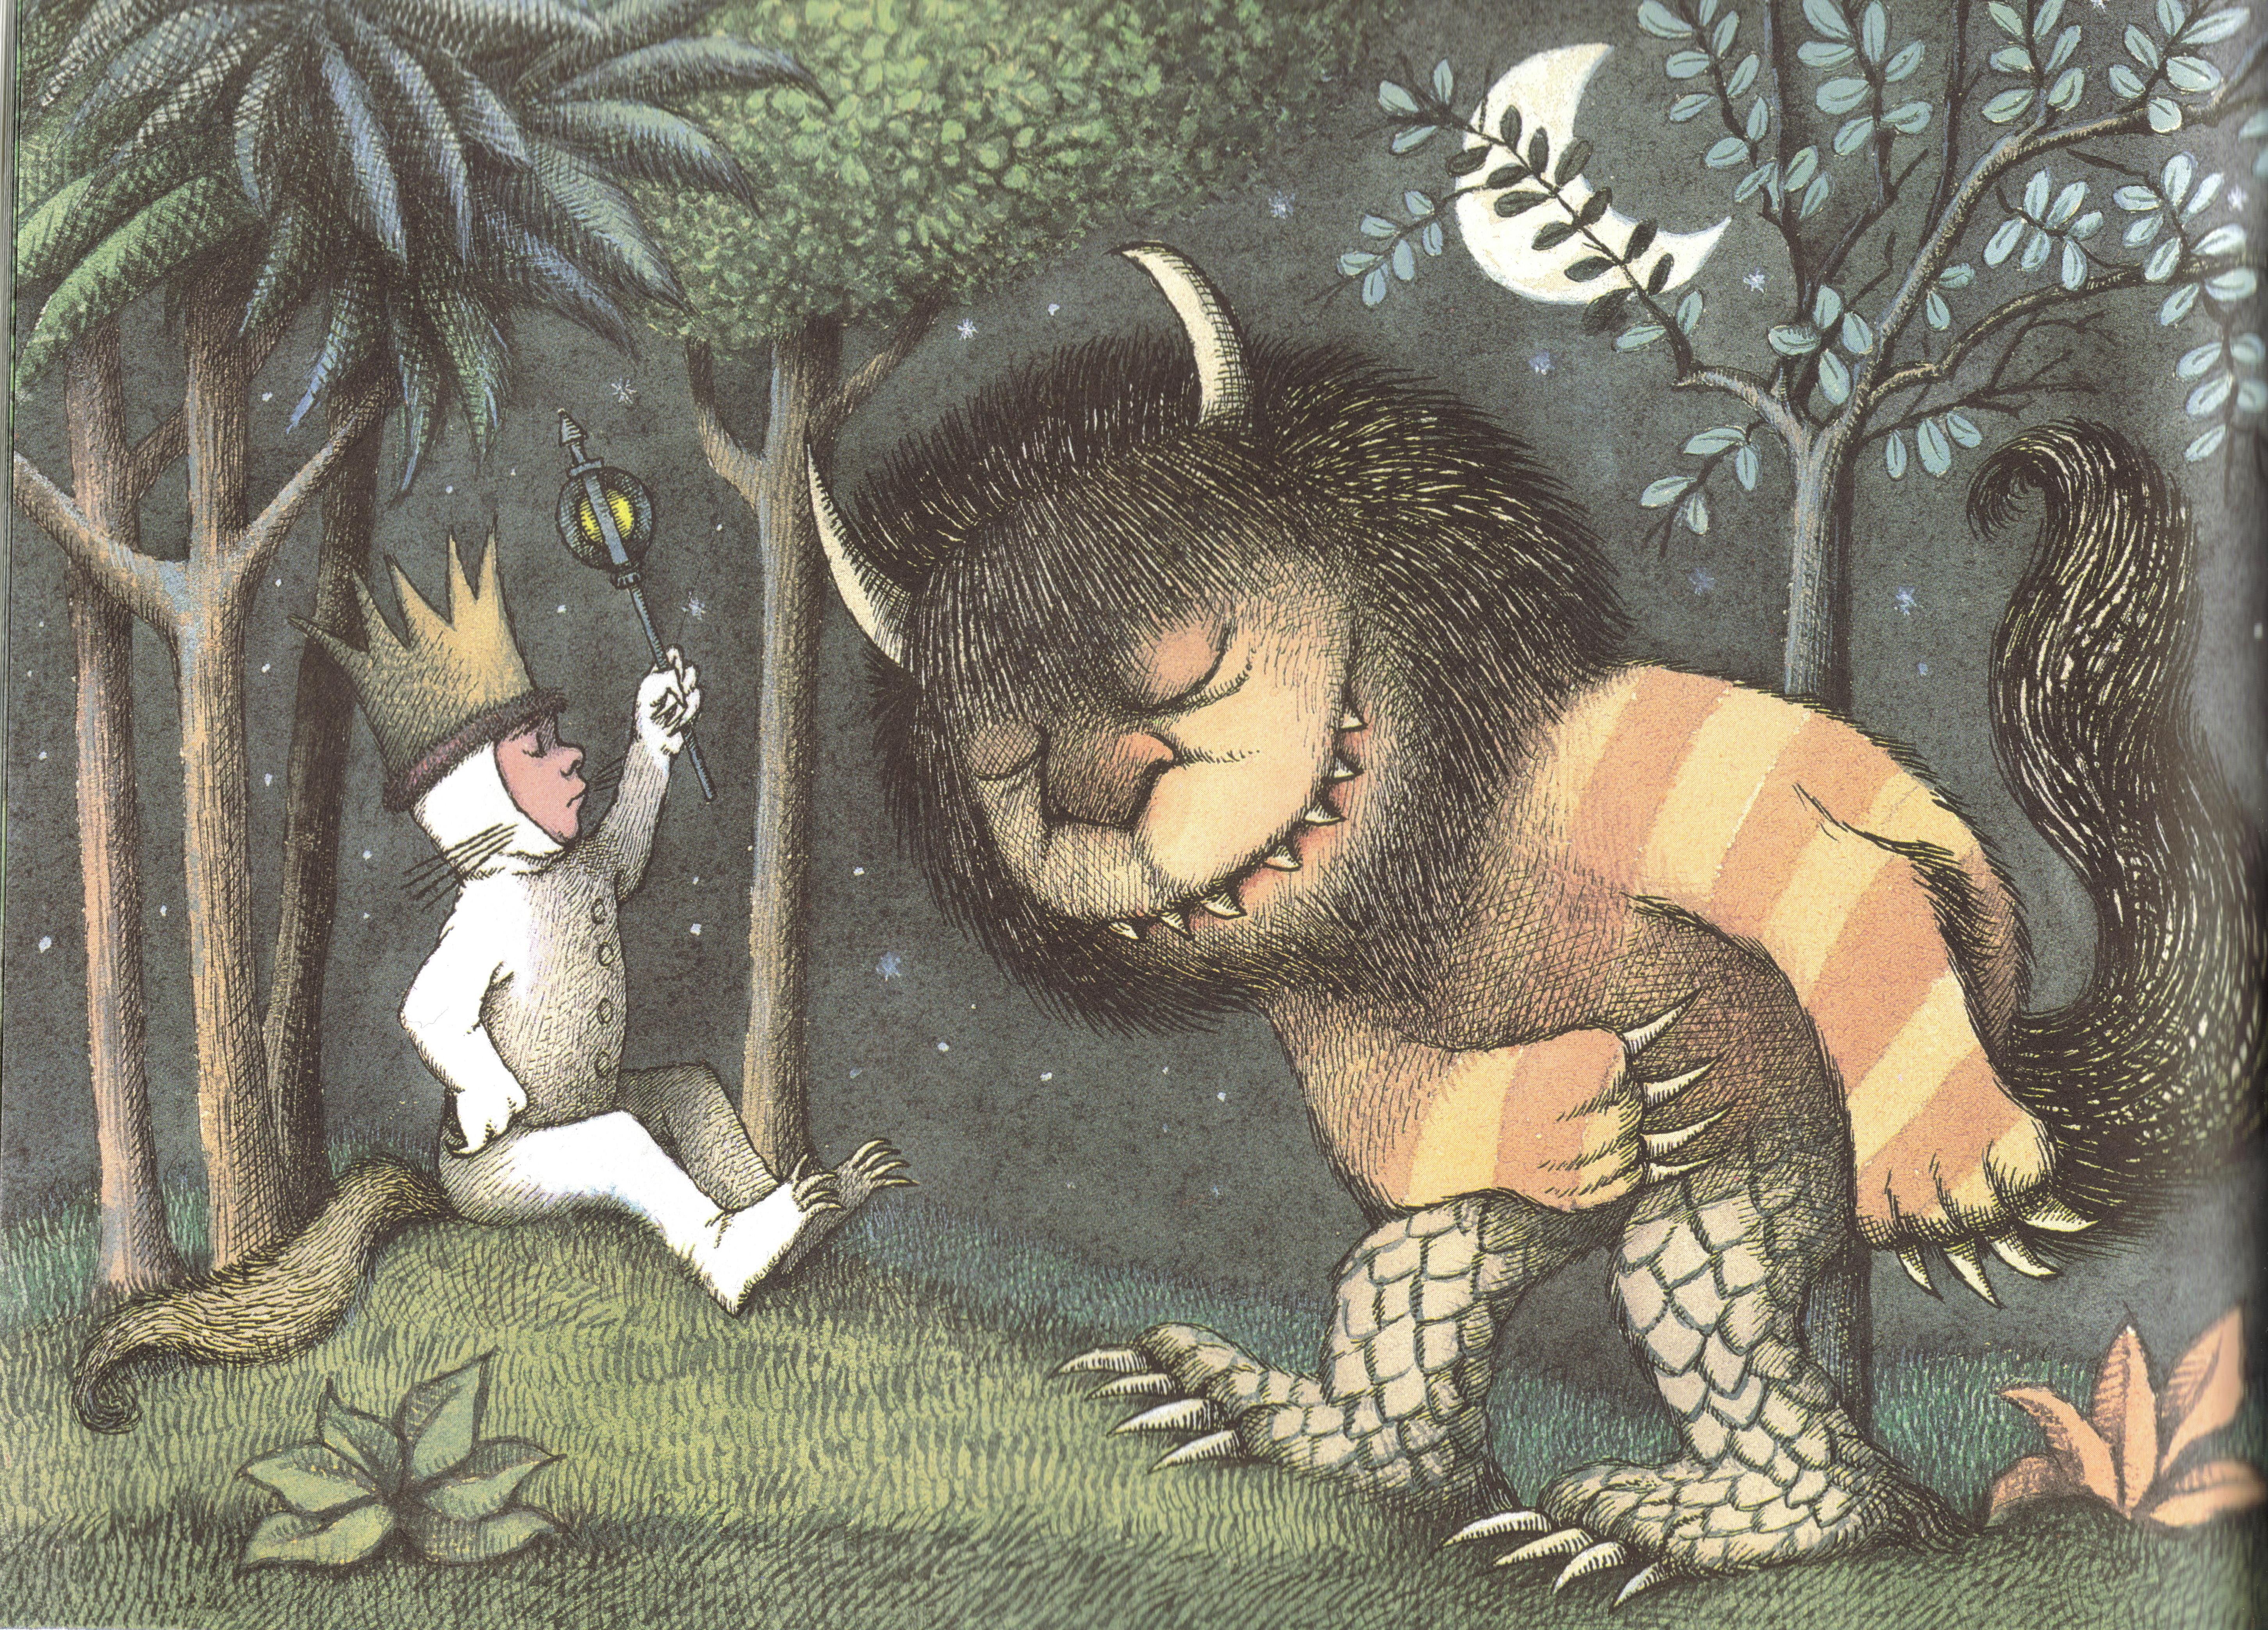 Where The Wild Things Are wallpaper, Cartoon, HQ Where The Wild Things Are pictureK Wallpaper 2019